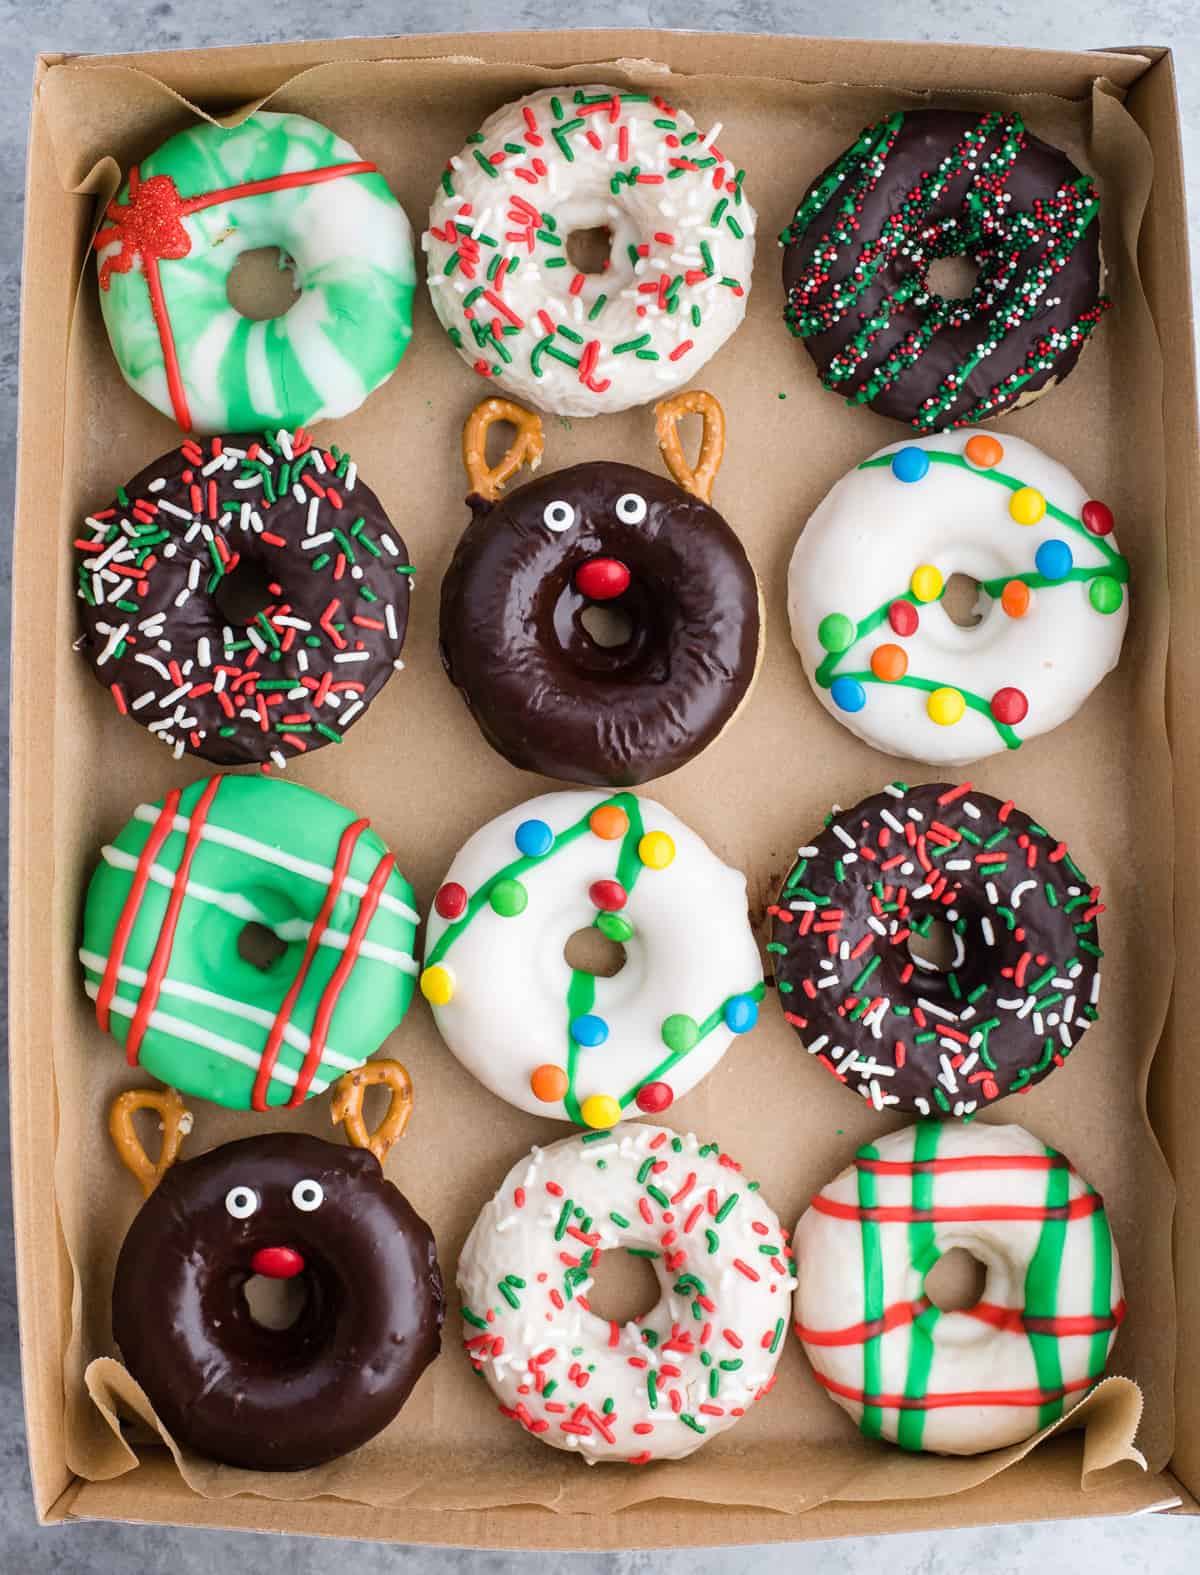 12 Christmas donuts arranged in a grid in a donut box